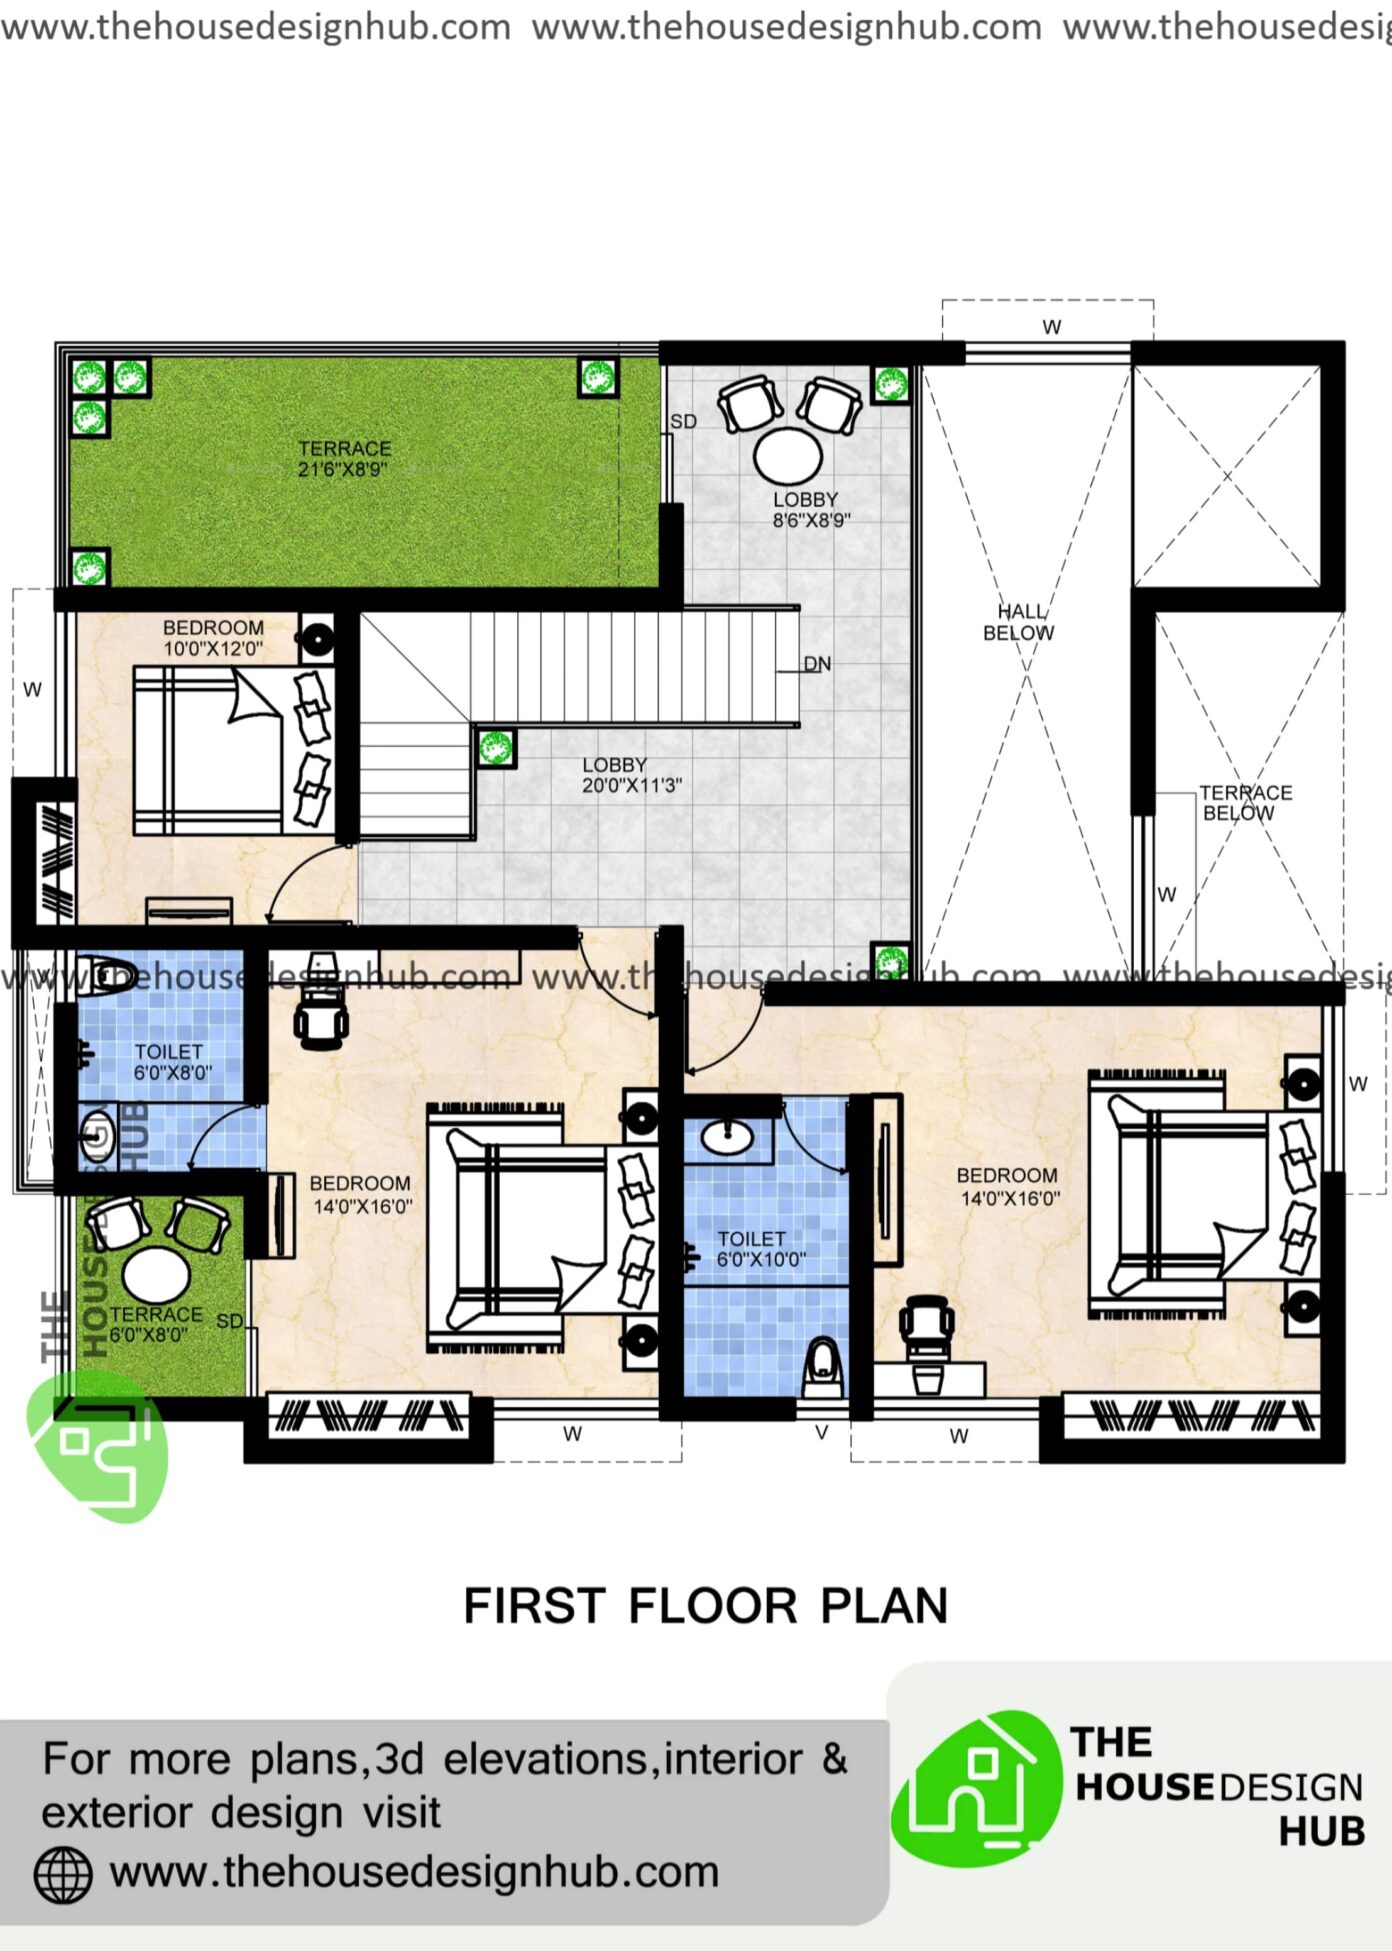 40 X 38 Ft 5 BHK Duplex House Plan In 3450 Sq Ft | The House Design Hub